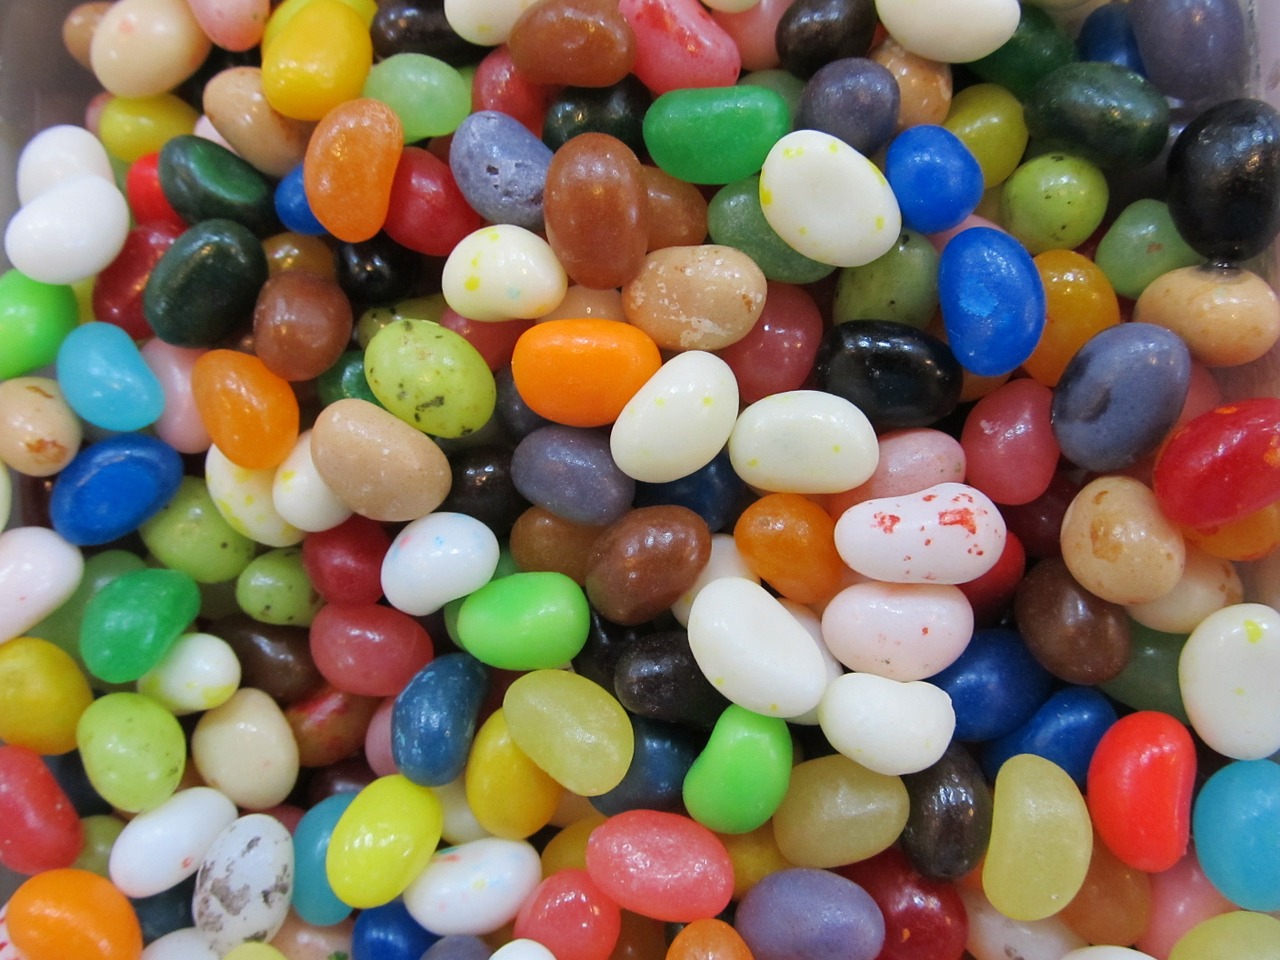 A big pile of colourful jellybeans